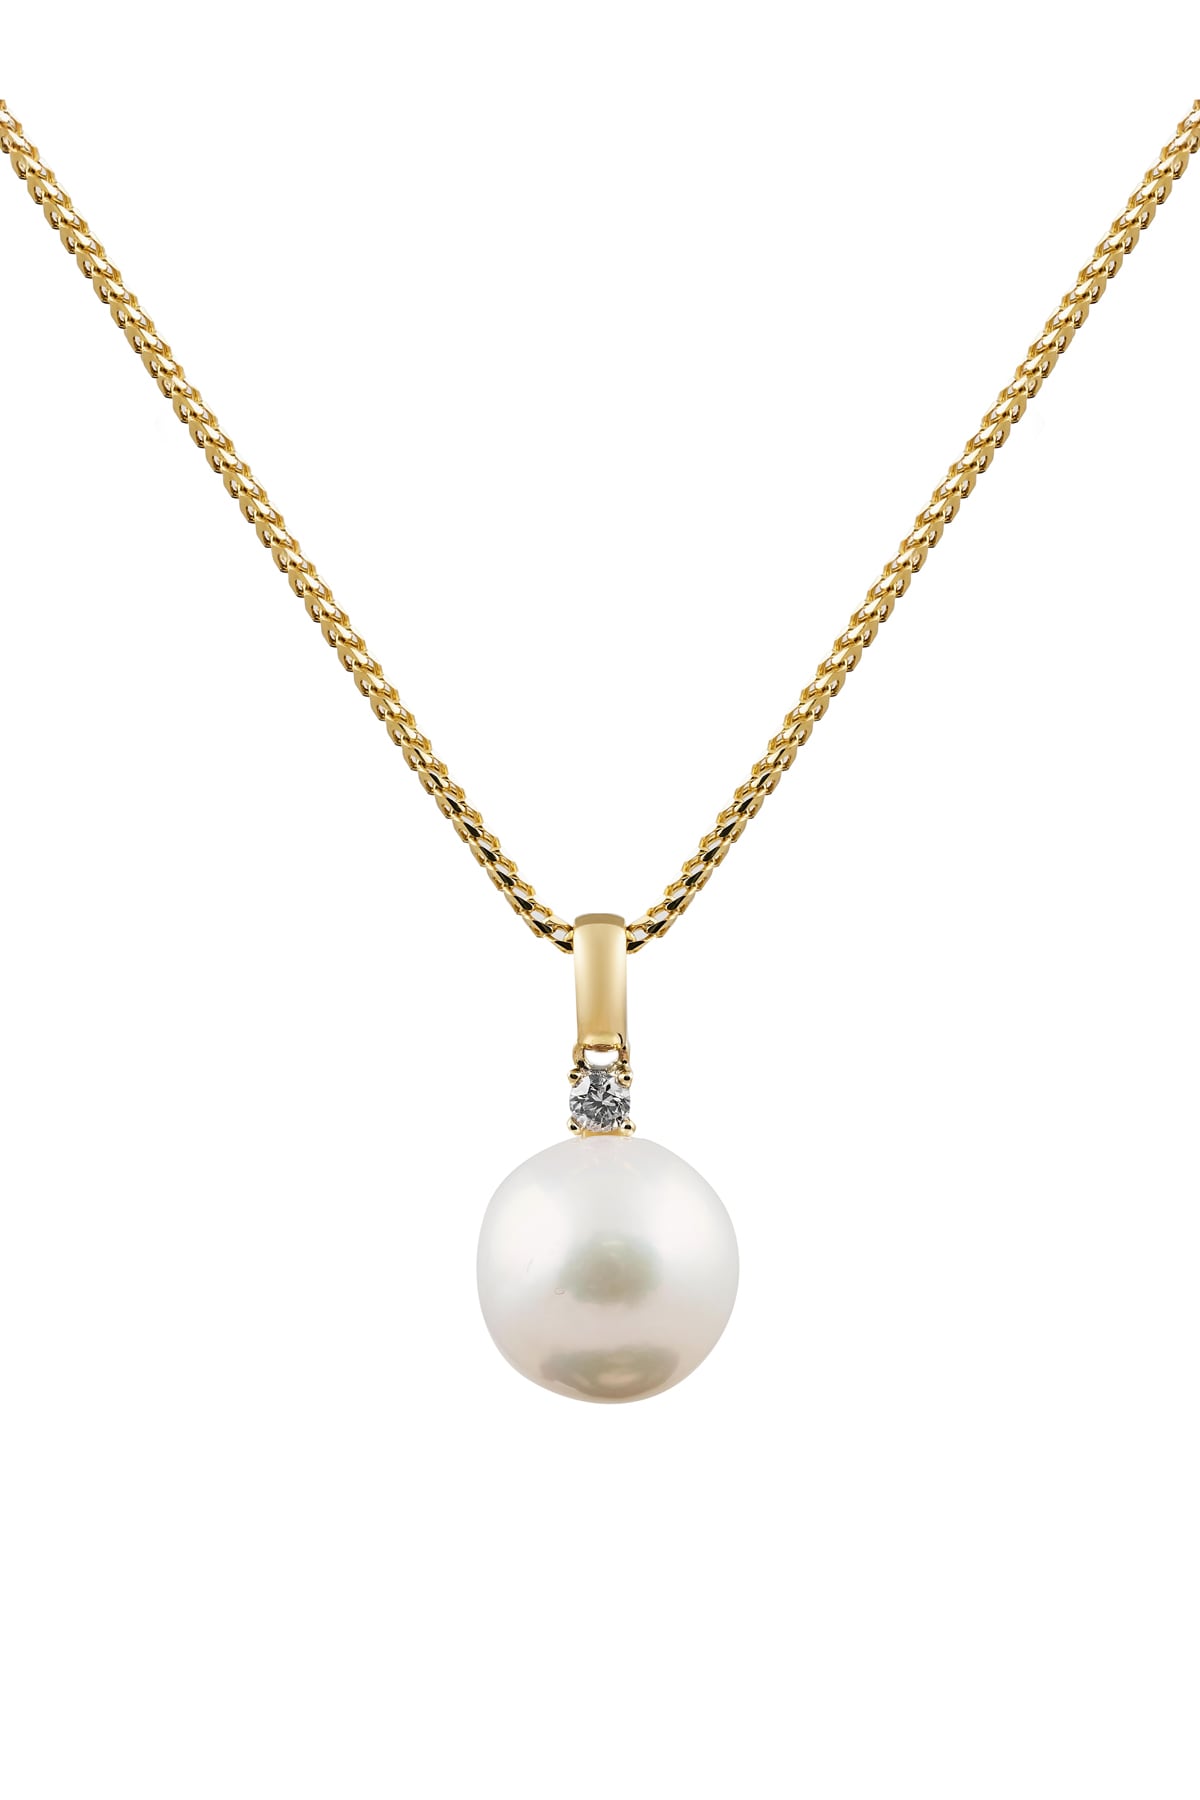 Pearls: Classic Beauty for the Modern Era